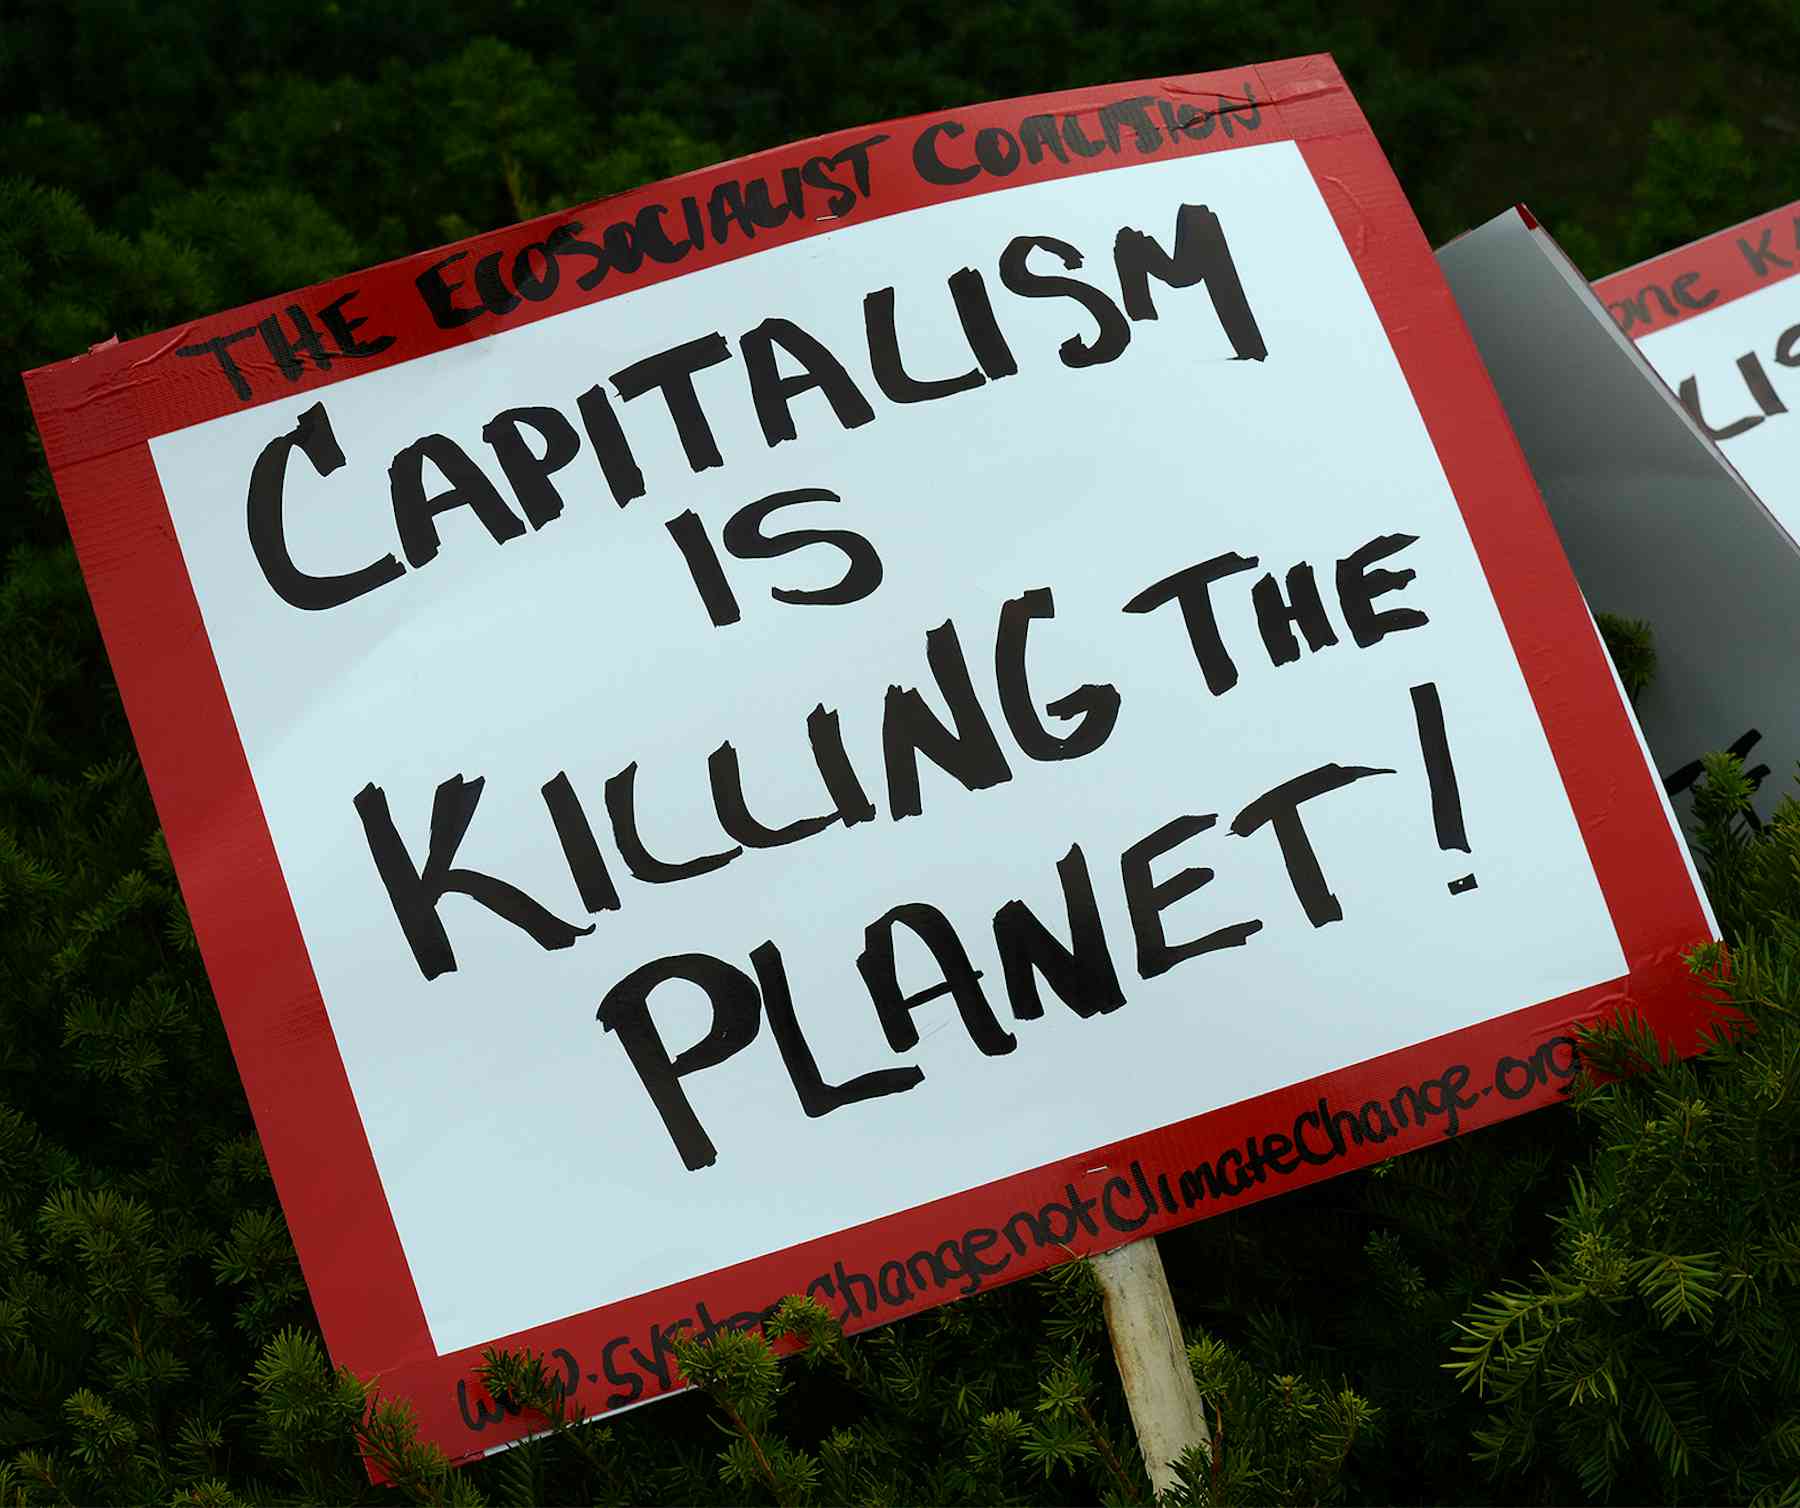 Capitalism must evolve to solve the climate crisis